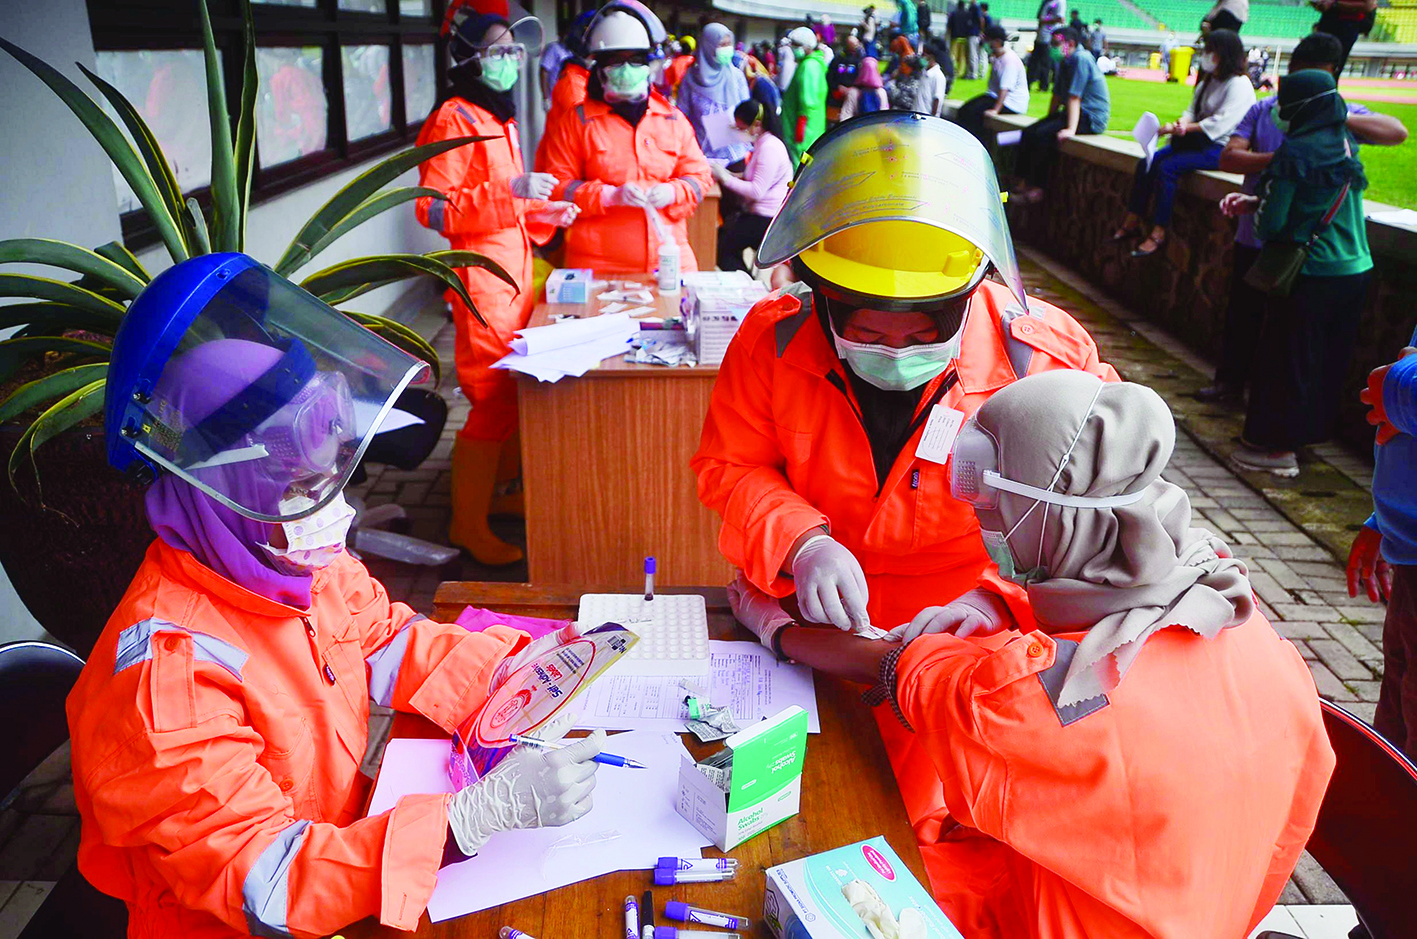 Indonesian medical staff take part in a mass test for the COVID-19 coronavirus at Patriot stadium in Bekasi, West Java on March 25, 2020. (Photo by REZAS / AFP)